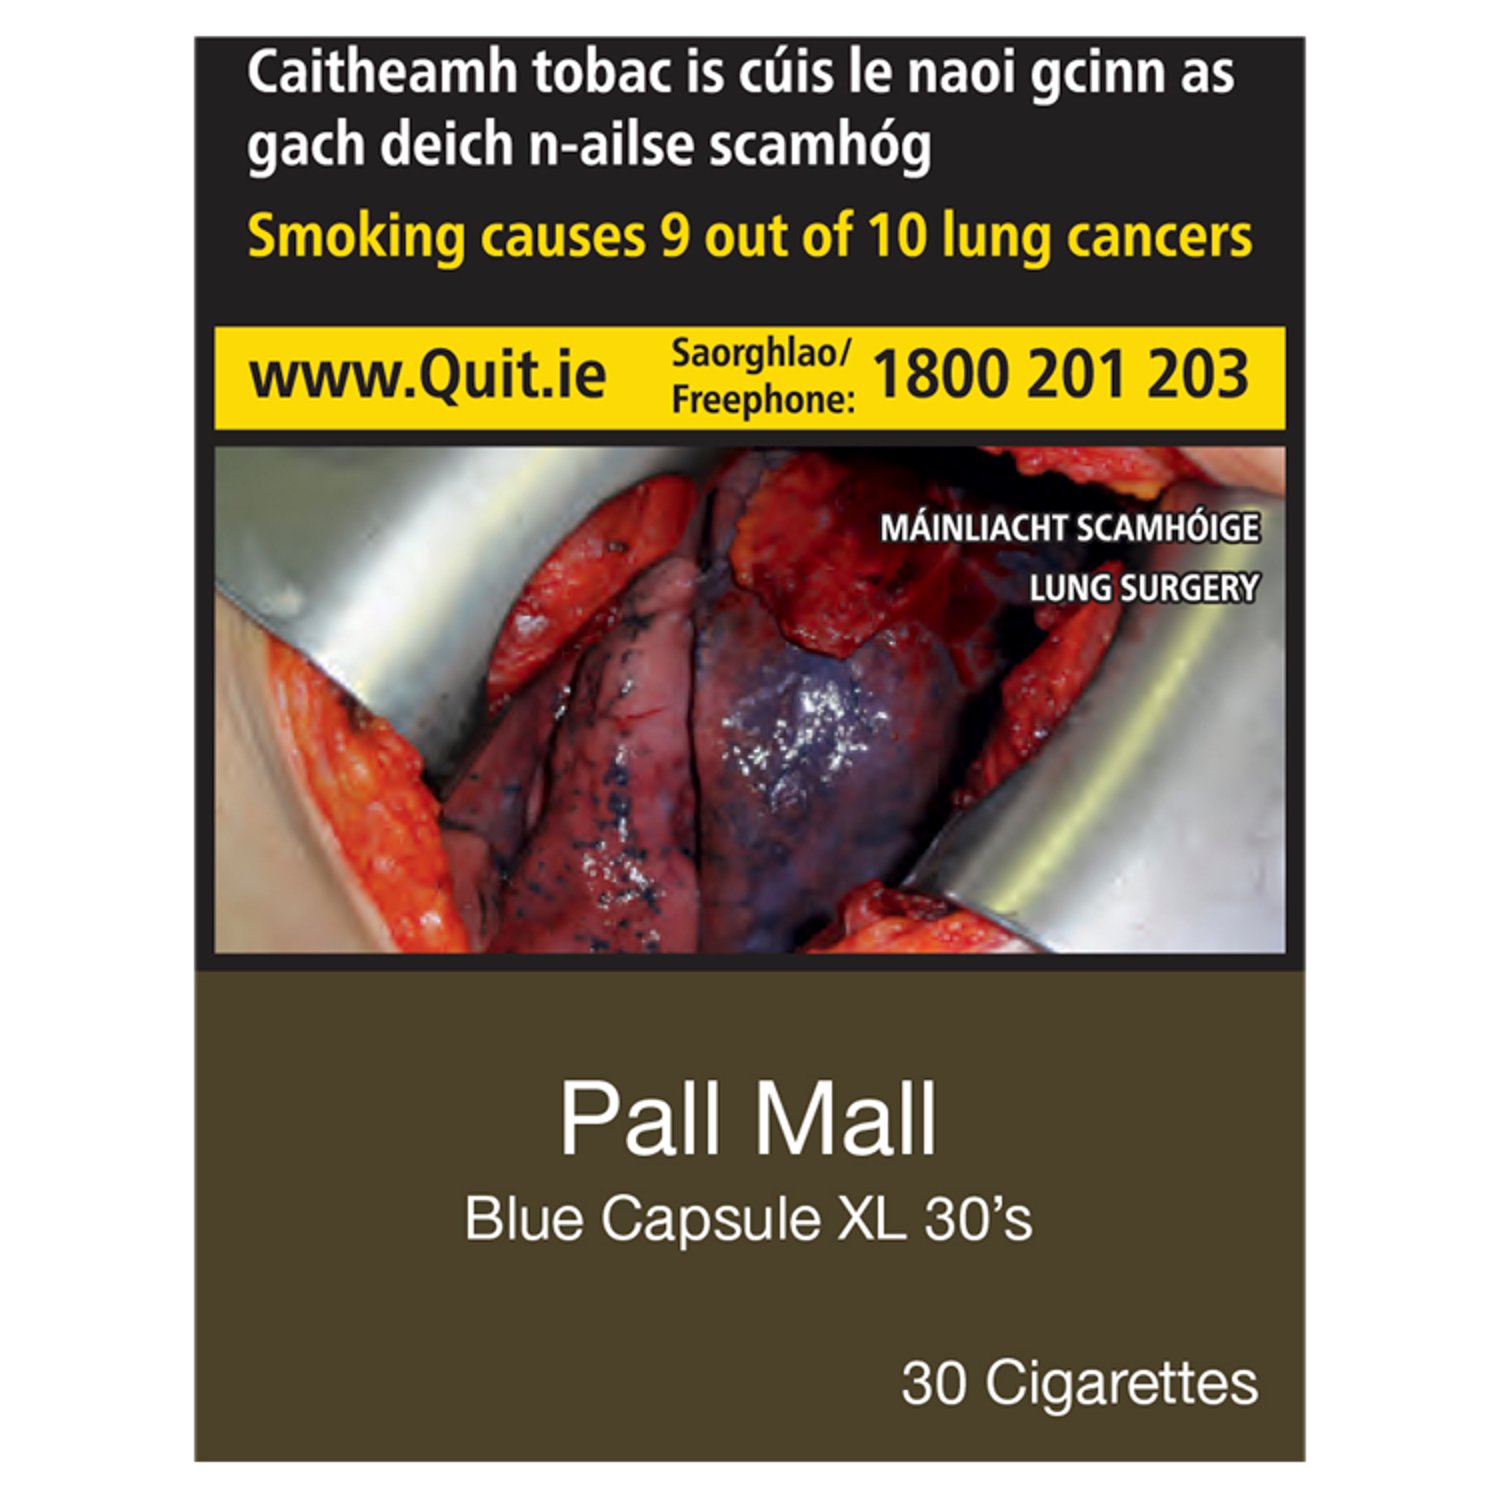 Pall Mall Blue Capsule XL 30 Cigarettes (30 Pack)